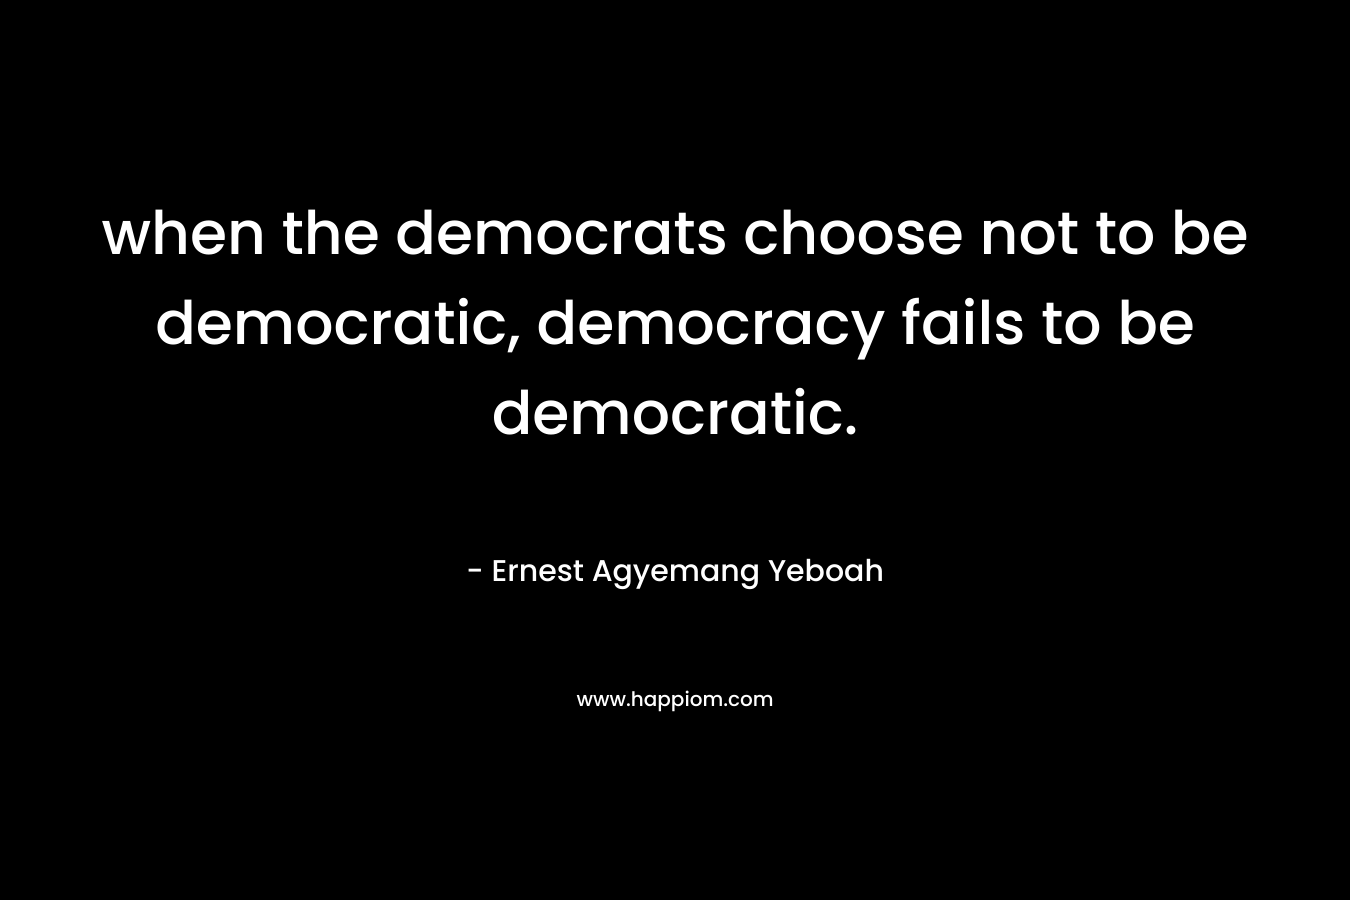 when the democrats choose not to be democratic, democracy fails to be democratic.